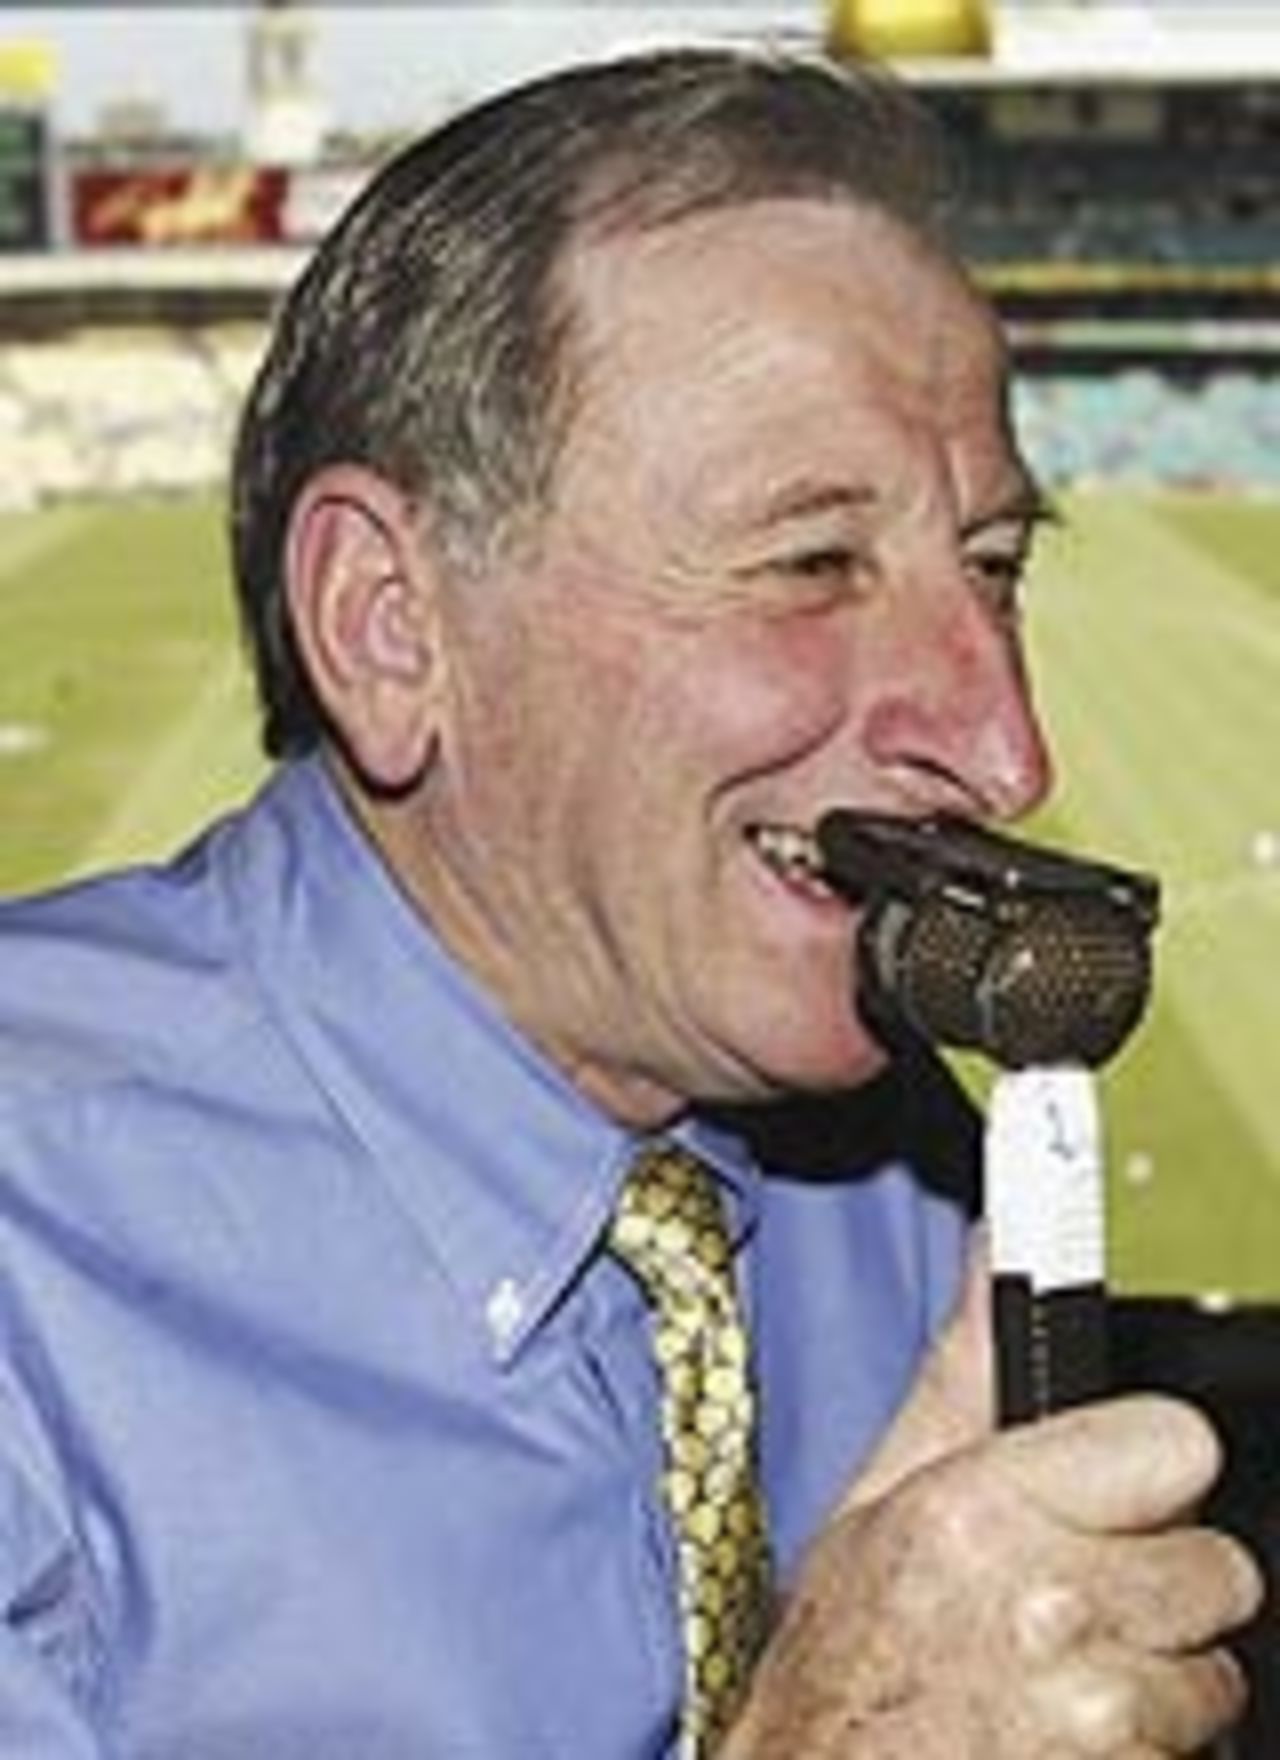 Nine Network Commentator Bill Lawry at the SCG, January 22, 2003